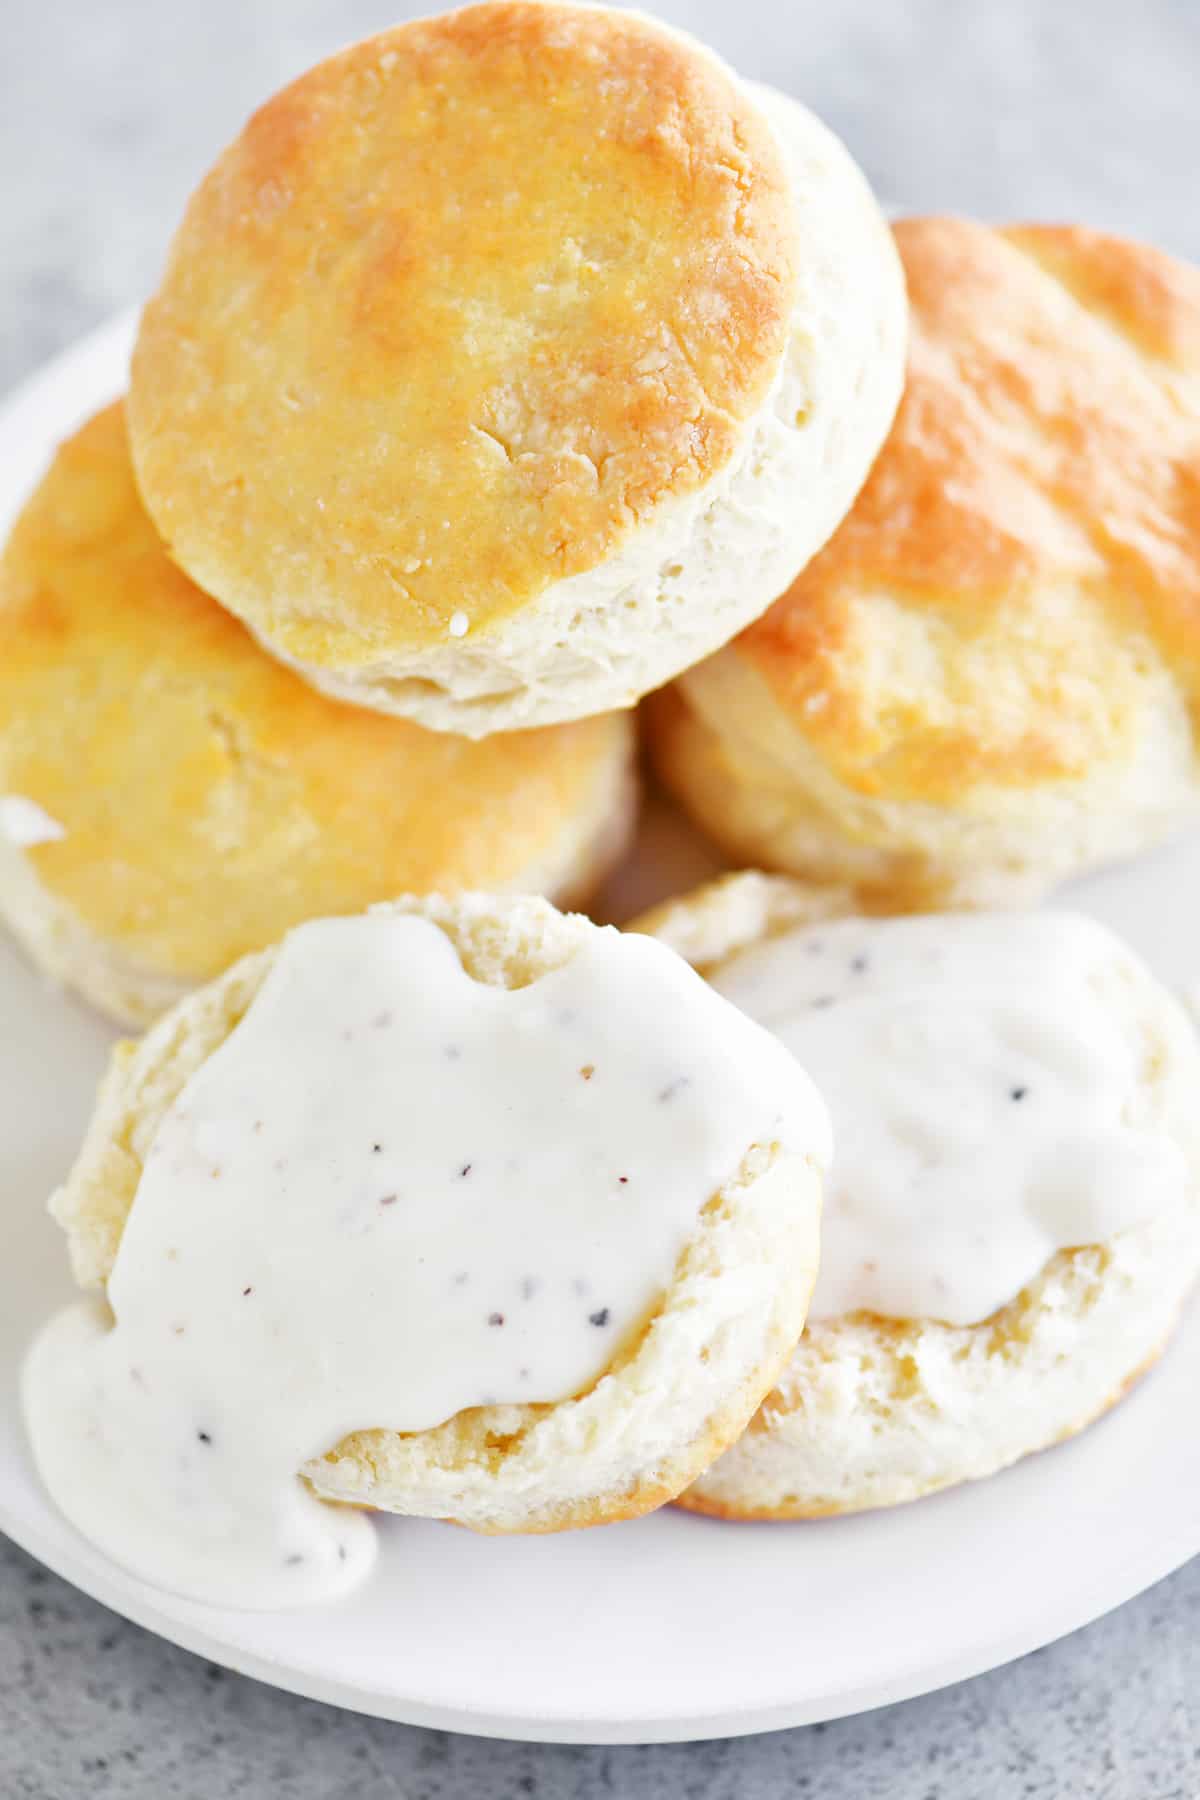 biscuits with gravy on a plate